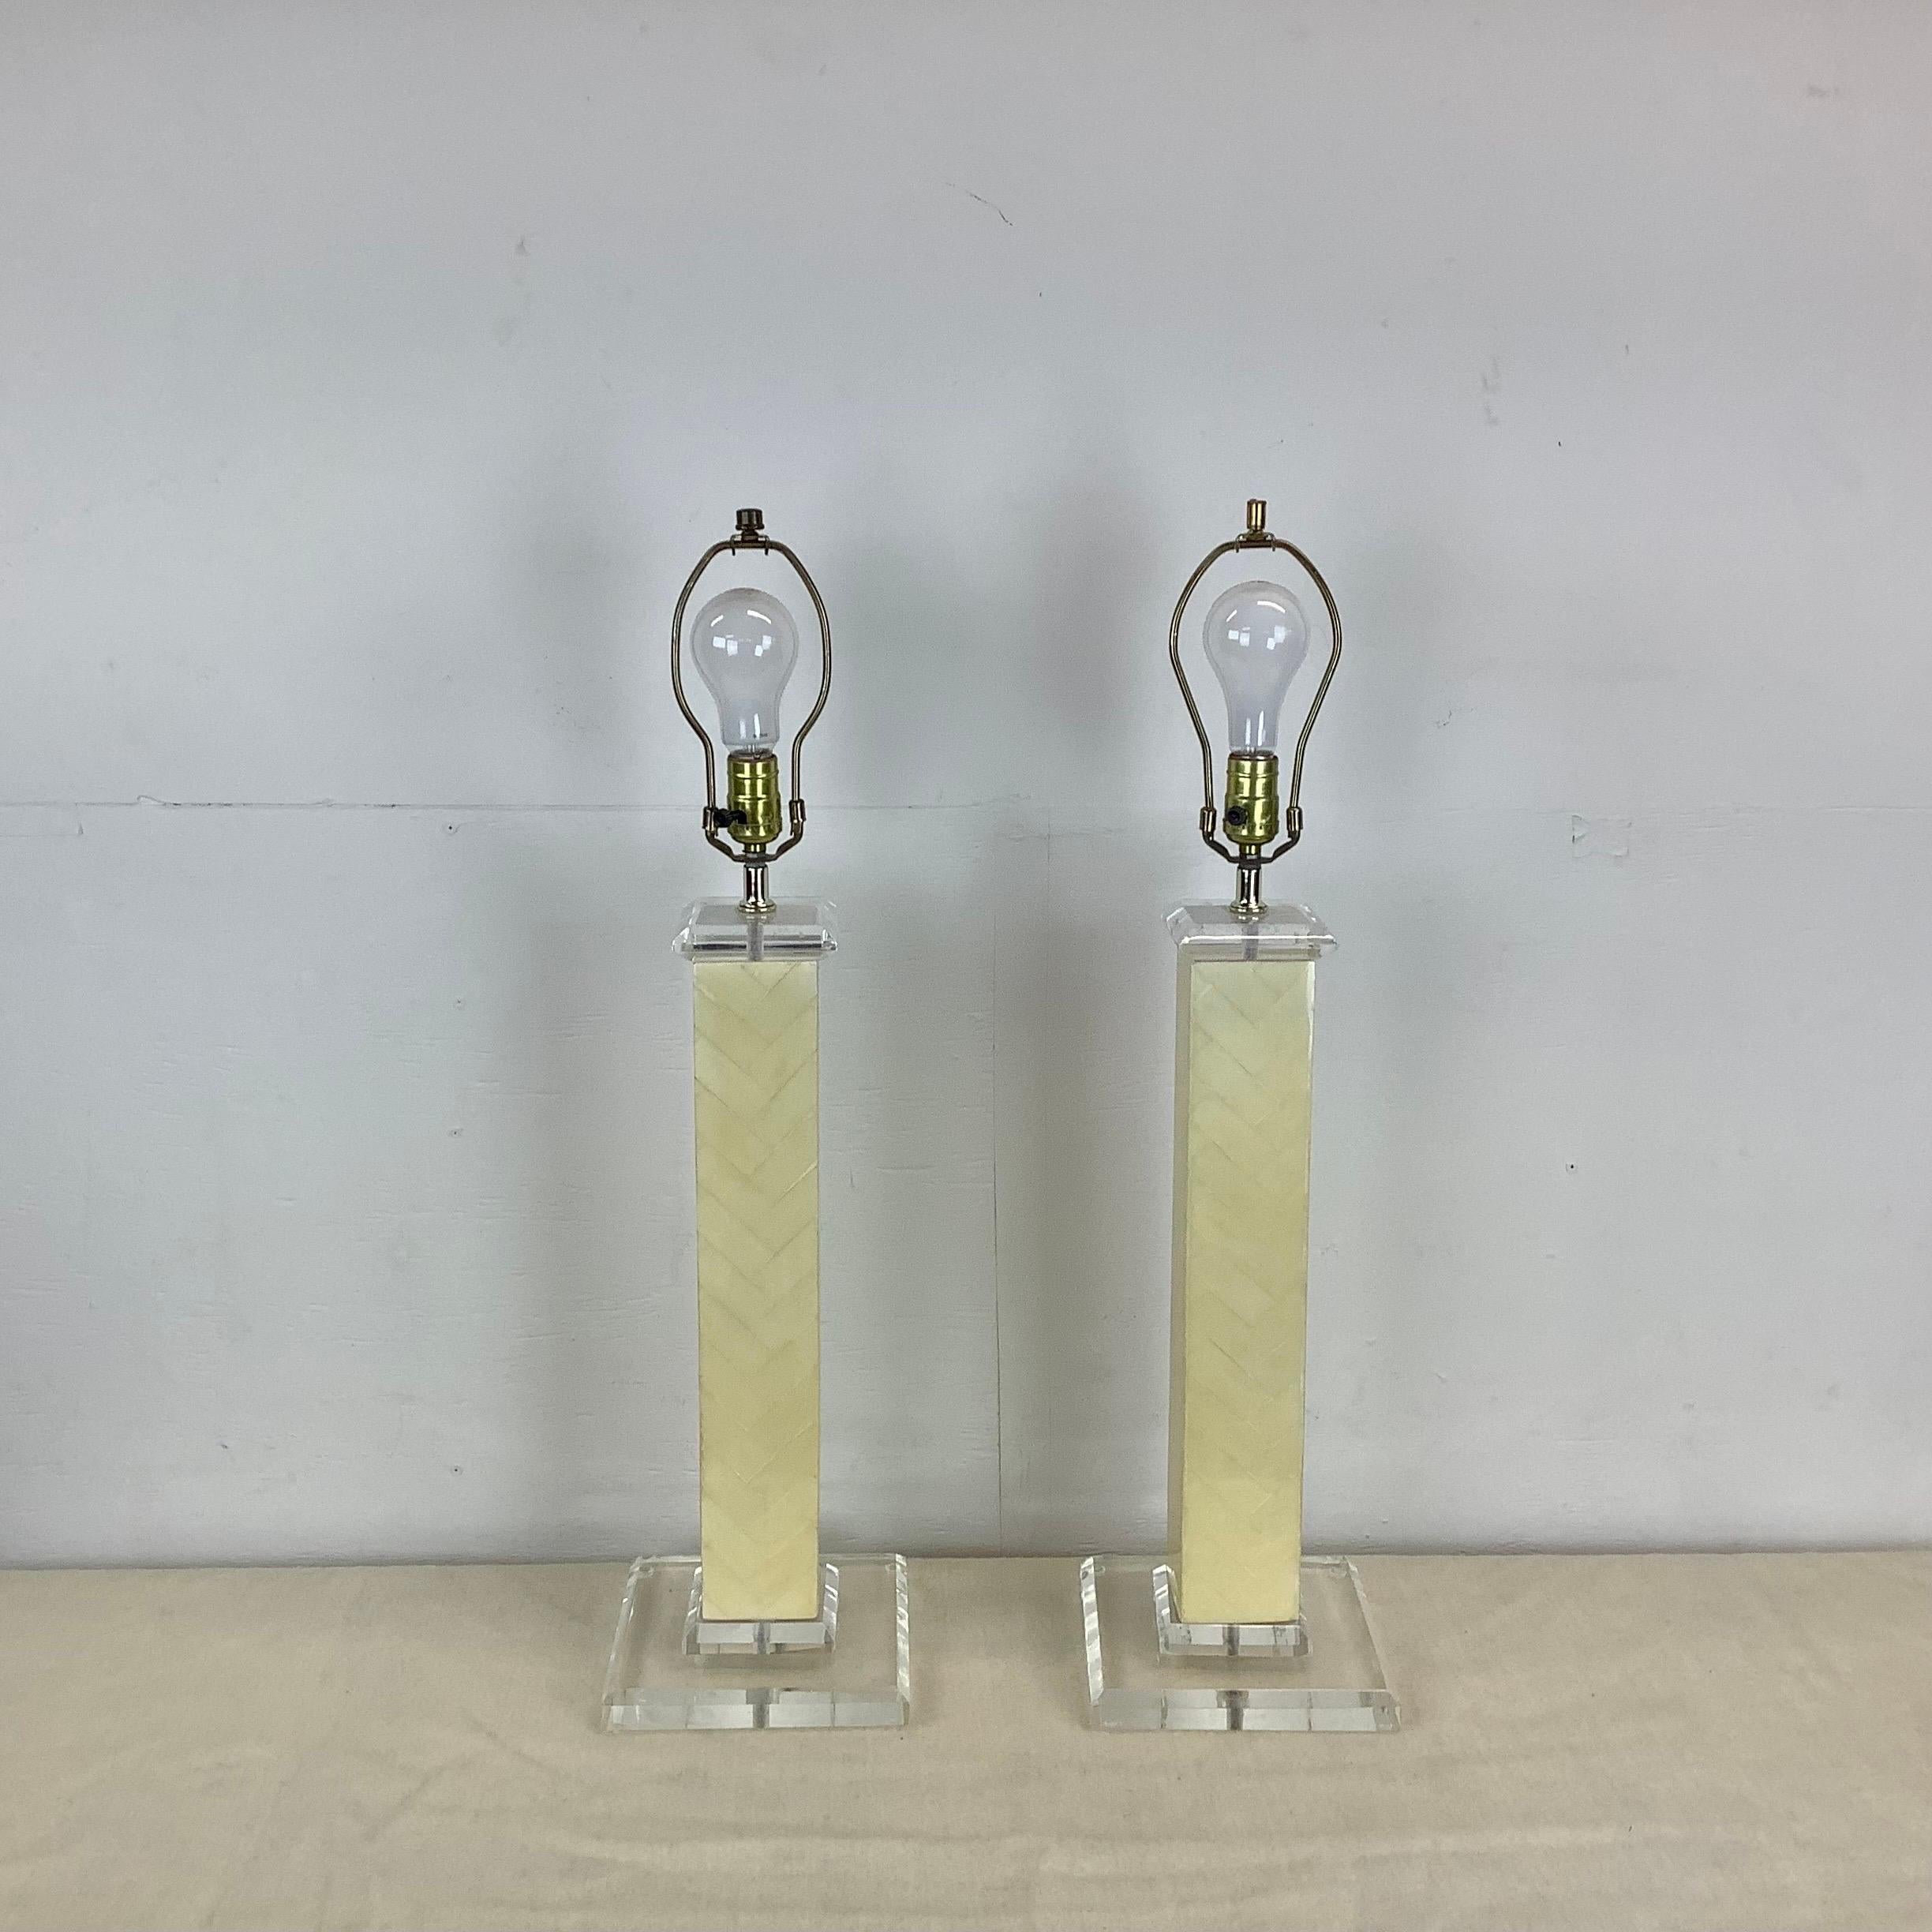 This impressive pair of tall vintage modern table lamps features a mixed material construction using clear lucite and lacquered tessellated bone-like finish. The elegant matching pair are perfect for home or office seating areas, bedside